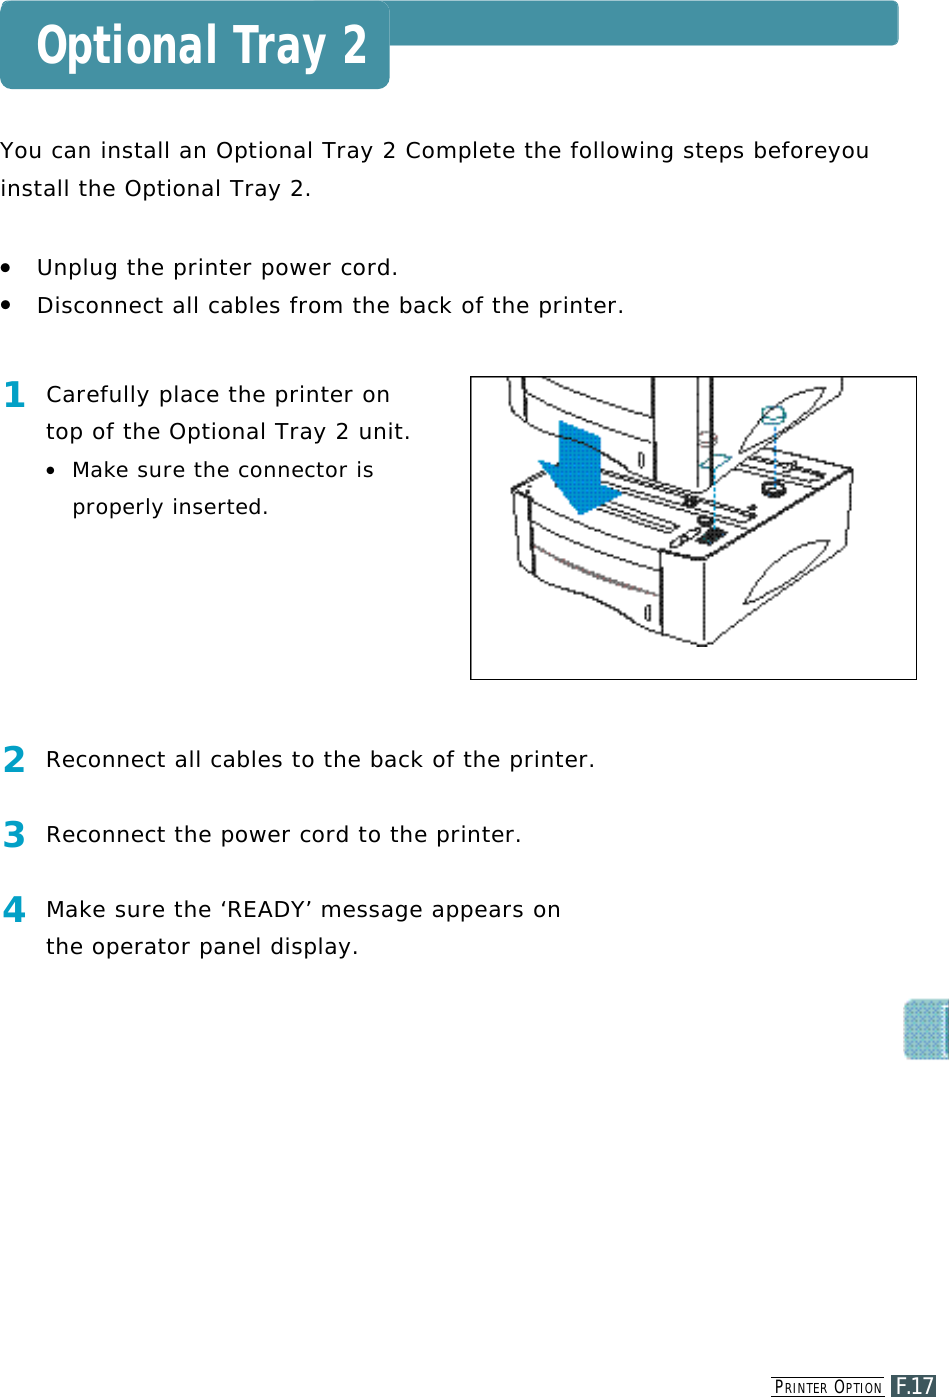 PR I N T E R OP T I O NF.17Optional Tray 2You can install an Optional Tray 2 Complete the following steps beforeyou install the Optional Tray 2. ●Unplug the printer power cord.●Disconnect all cables from the back of the printer.1Carefully place the printer ontop of the Optional Tray 2 unit.●M a ke sure the connector isproperly inserted.2Reconnect all cables to the back of the printer.3Reconnect the power cord to the printer.4M a ke sure the ‘READY’ message appears on the operator panel display.